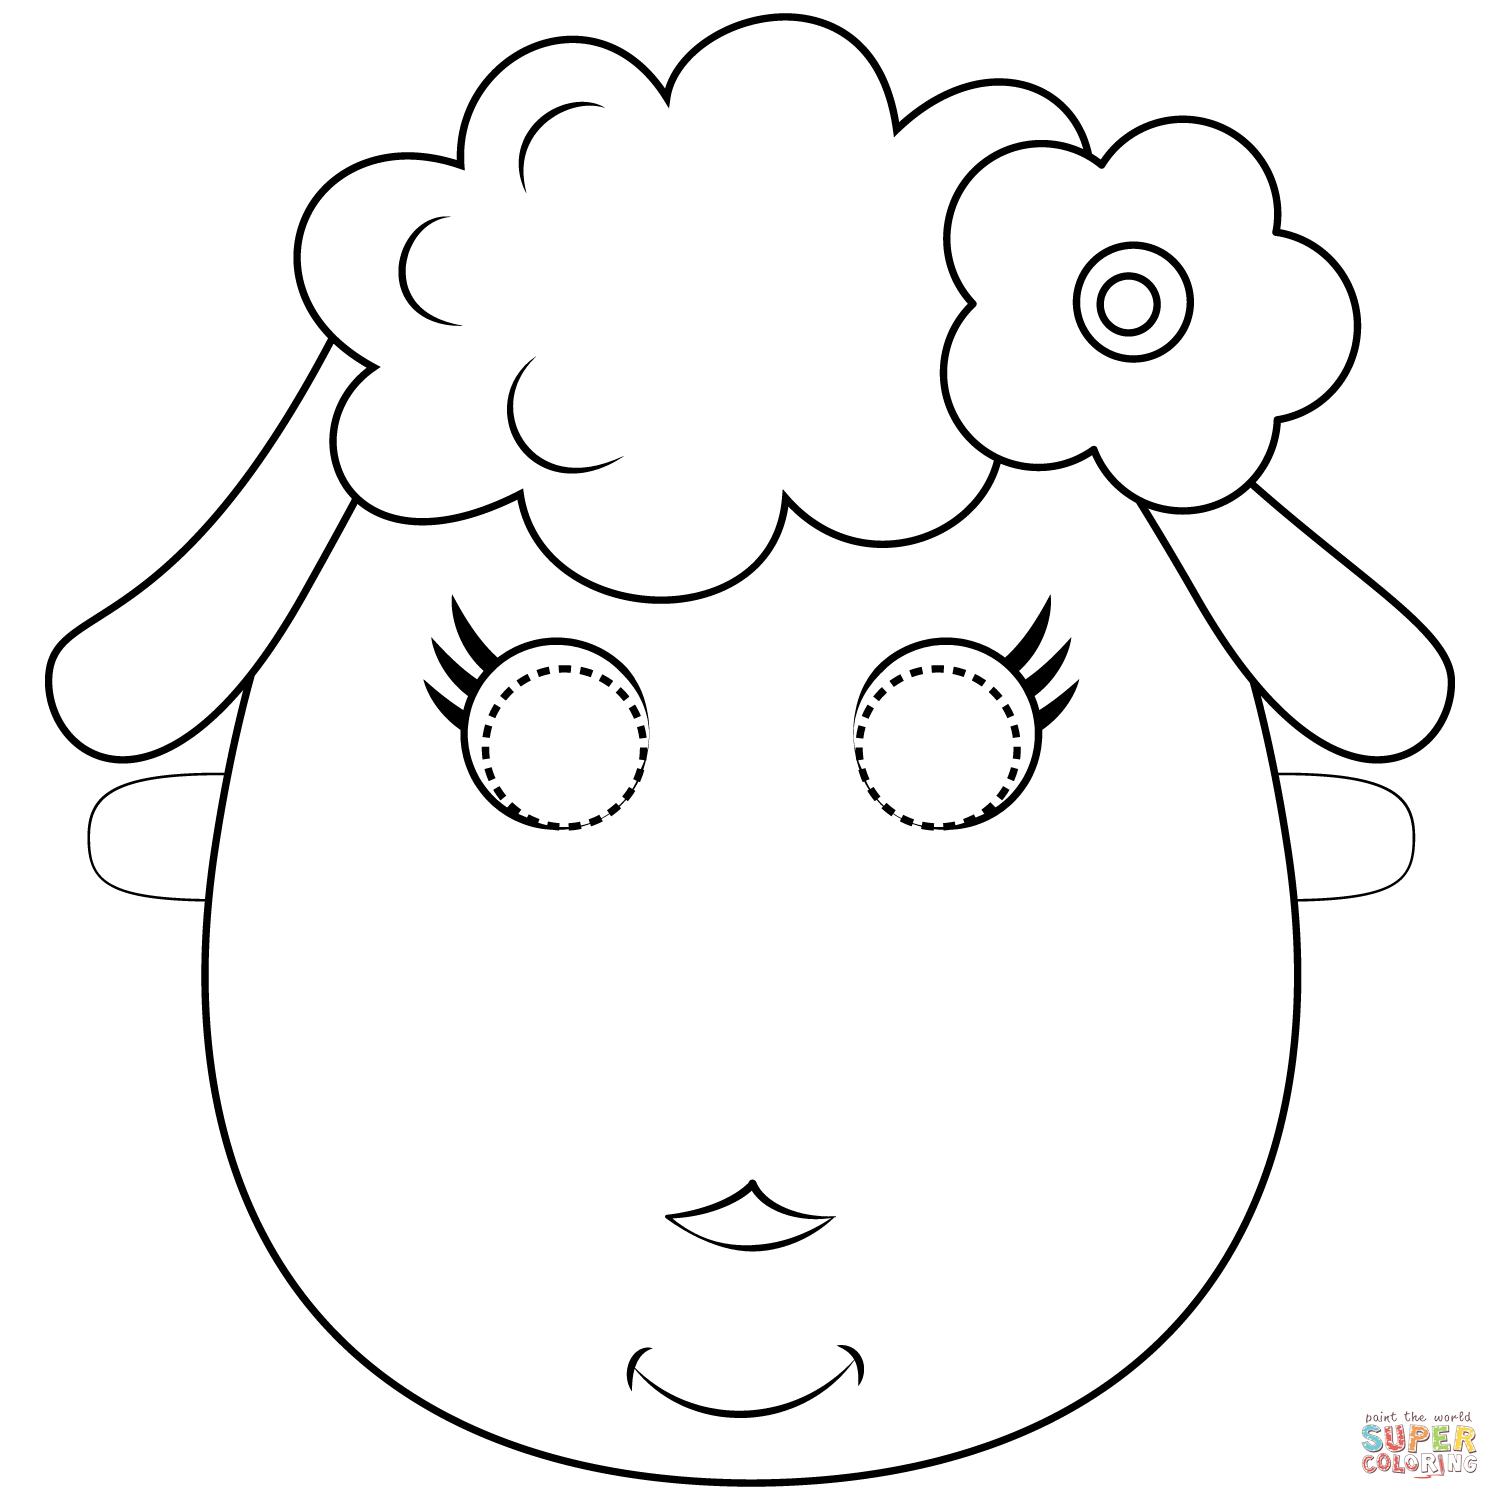 Sheep Face Coloring Page Sheep Mask Coloring Page Free Printable Coloring Pages